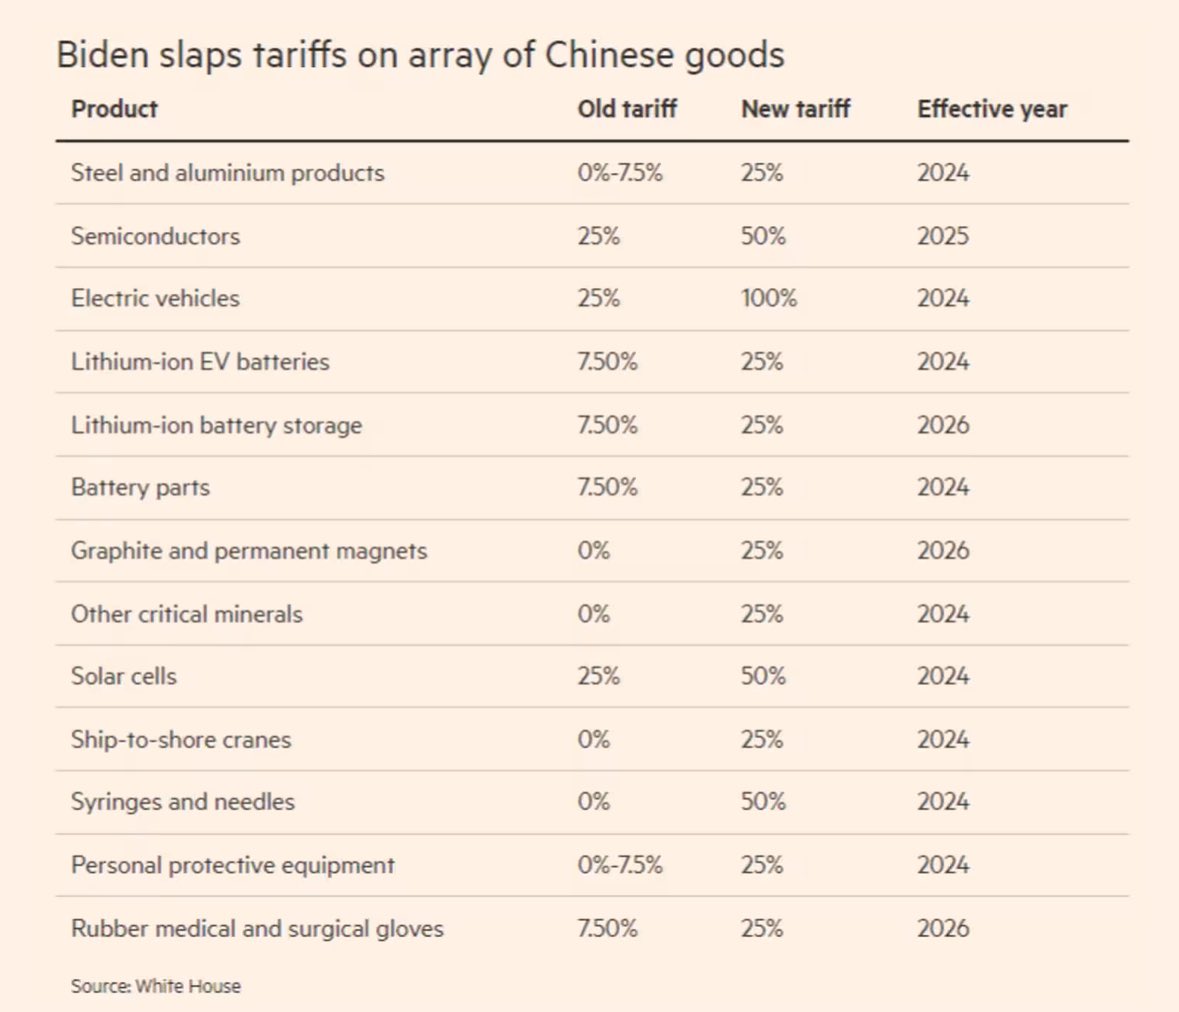 Stunned by the latest US tariffs against China for many reasons including that inflation is consistently the biggest concern of voters. What if tariffs push up critical upstream prices? What if China retaliates, pushing up prices of all sorts of consumer goods?